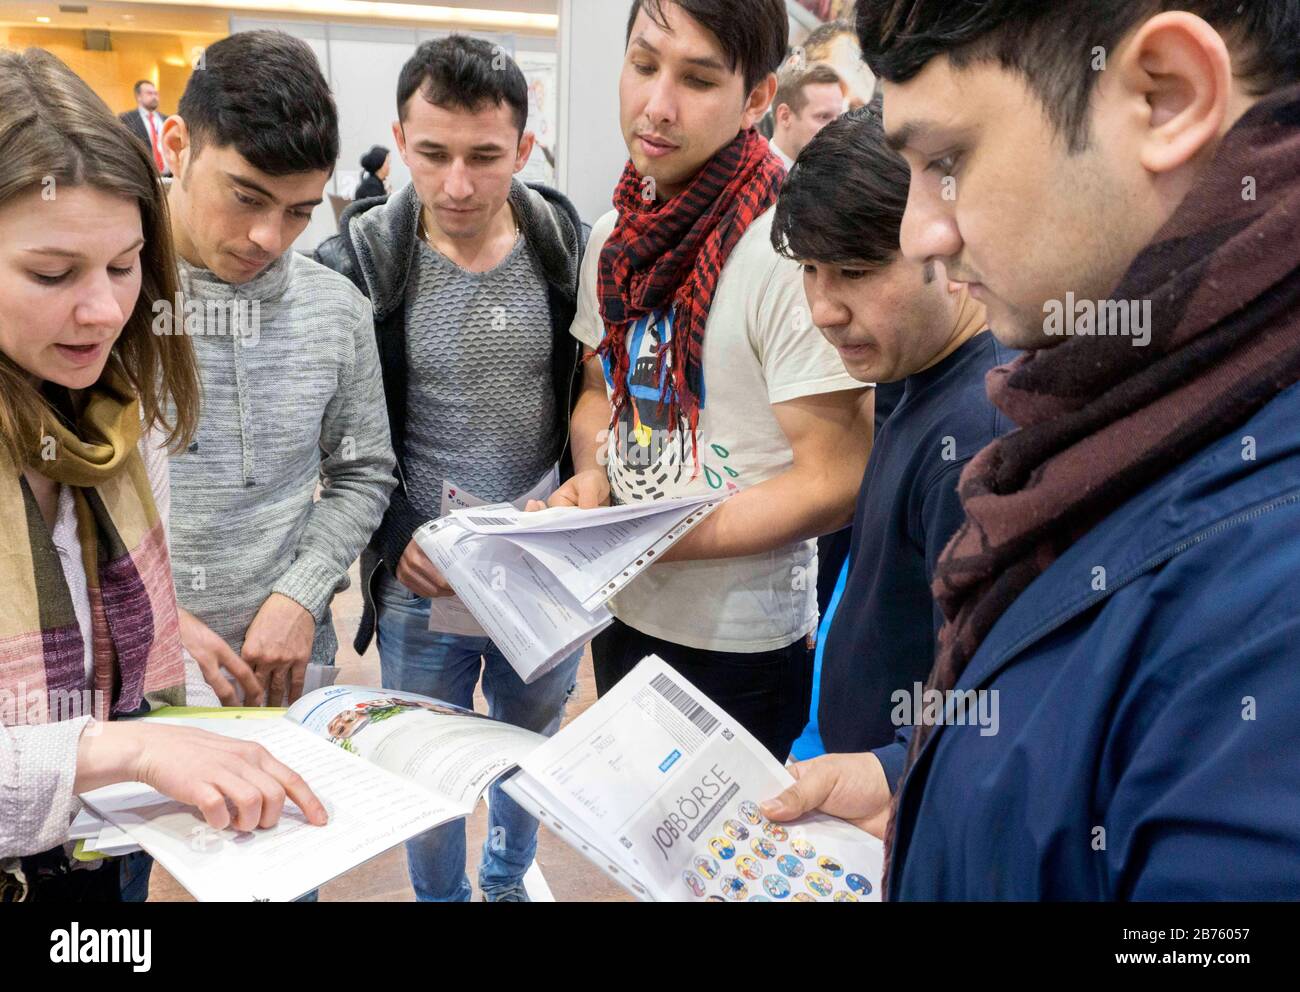 Afghan refugees will receive information about the Berlin job exchange for refugees from their teacher on 25.01.2017.4200 refugees looking for work have registered for the job exchange. [automated translation] Stock Photo